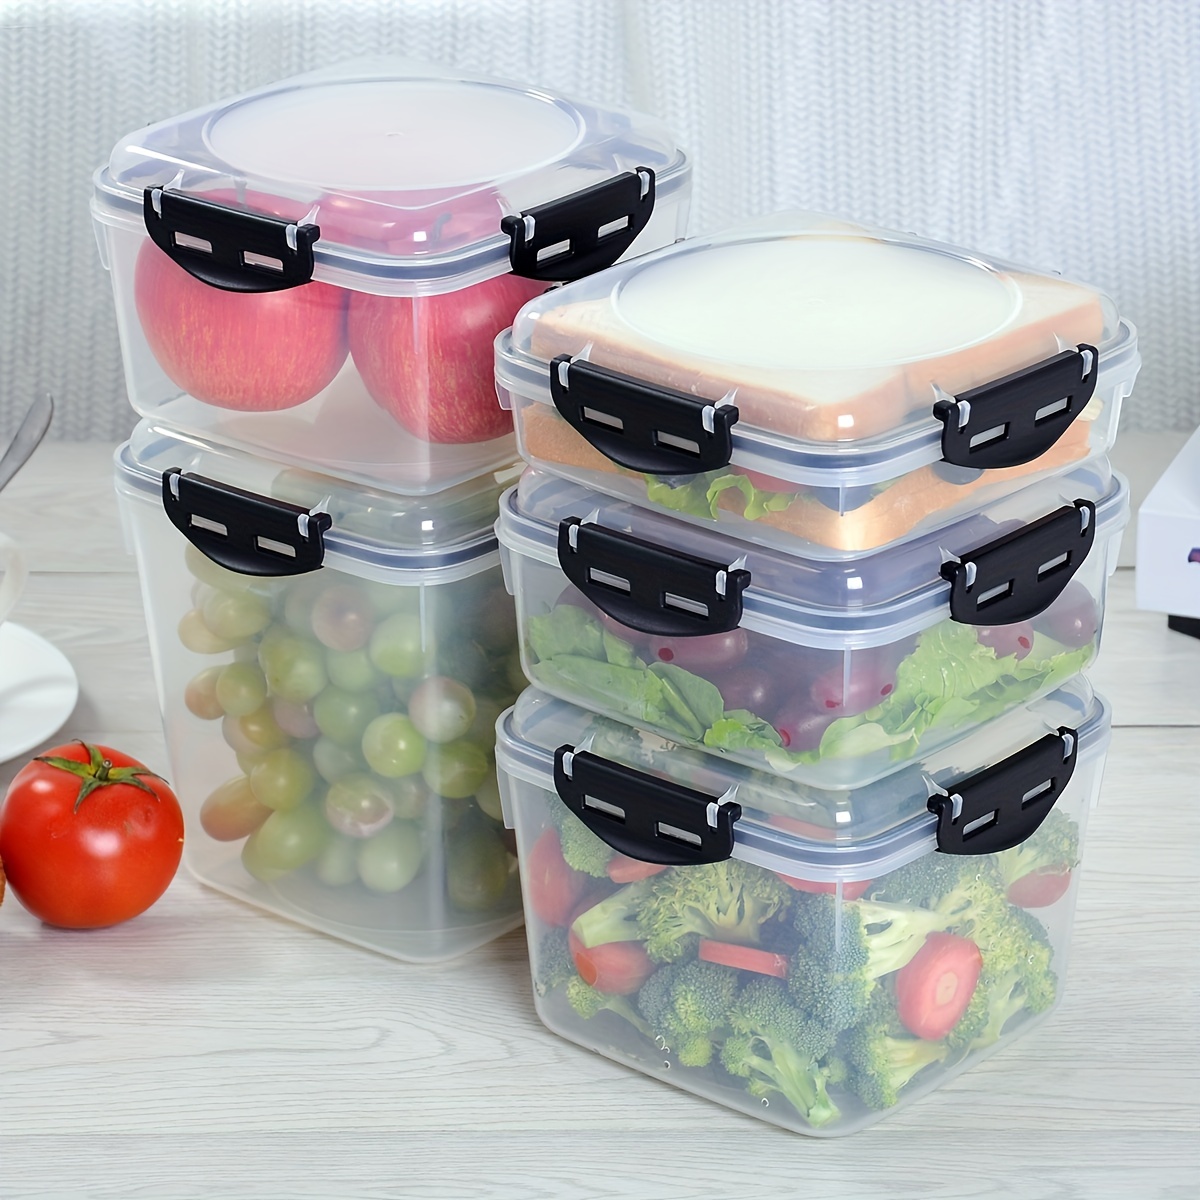 Airtight Storage Containers Bulk Cereals Organizers Stackable Dry